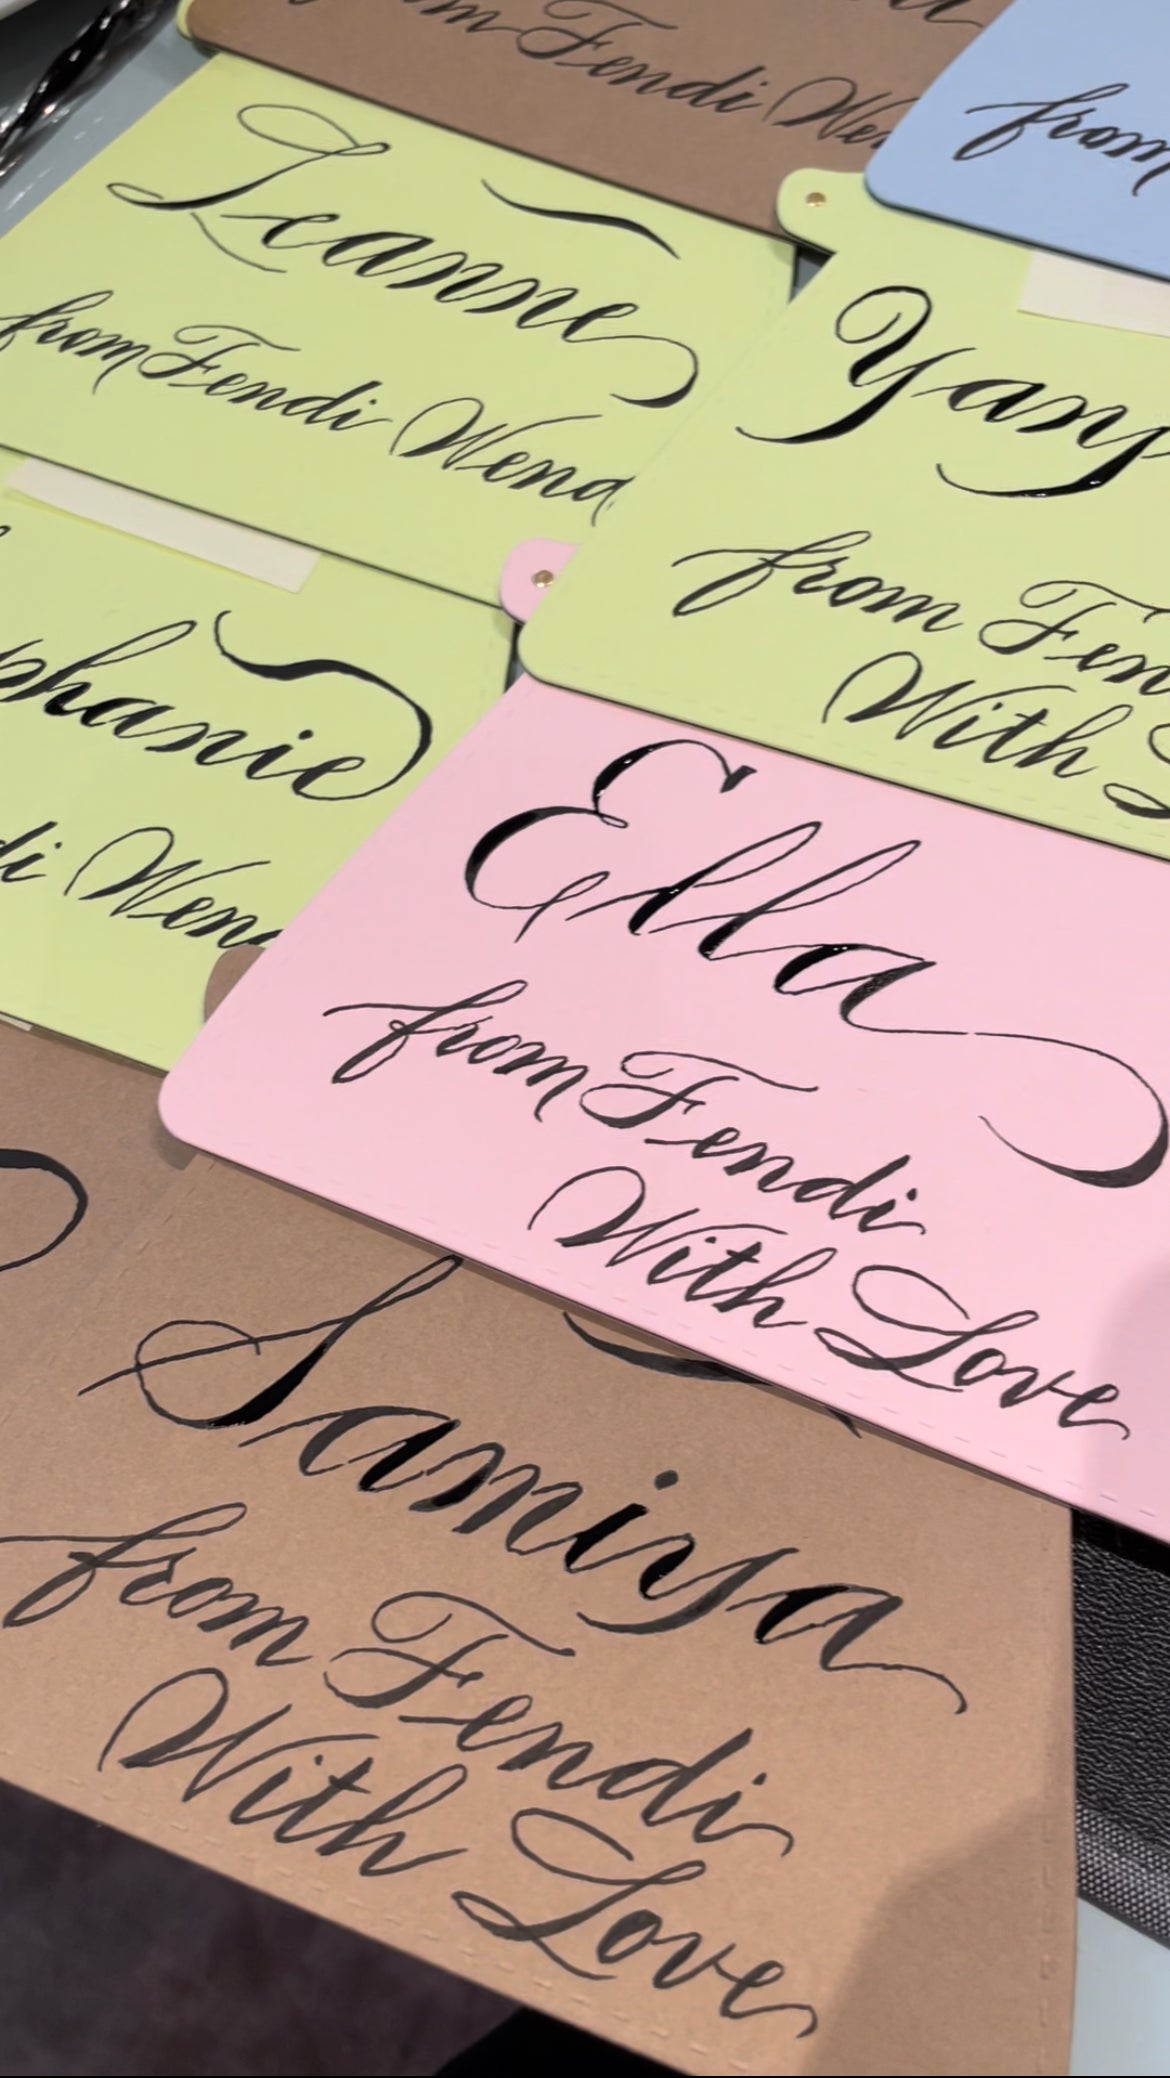 Live toronto calligraphy | Brand activation event at Fendi with custom gift tags in madarasz handwritten script